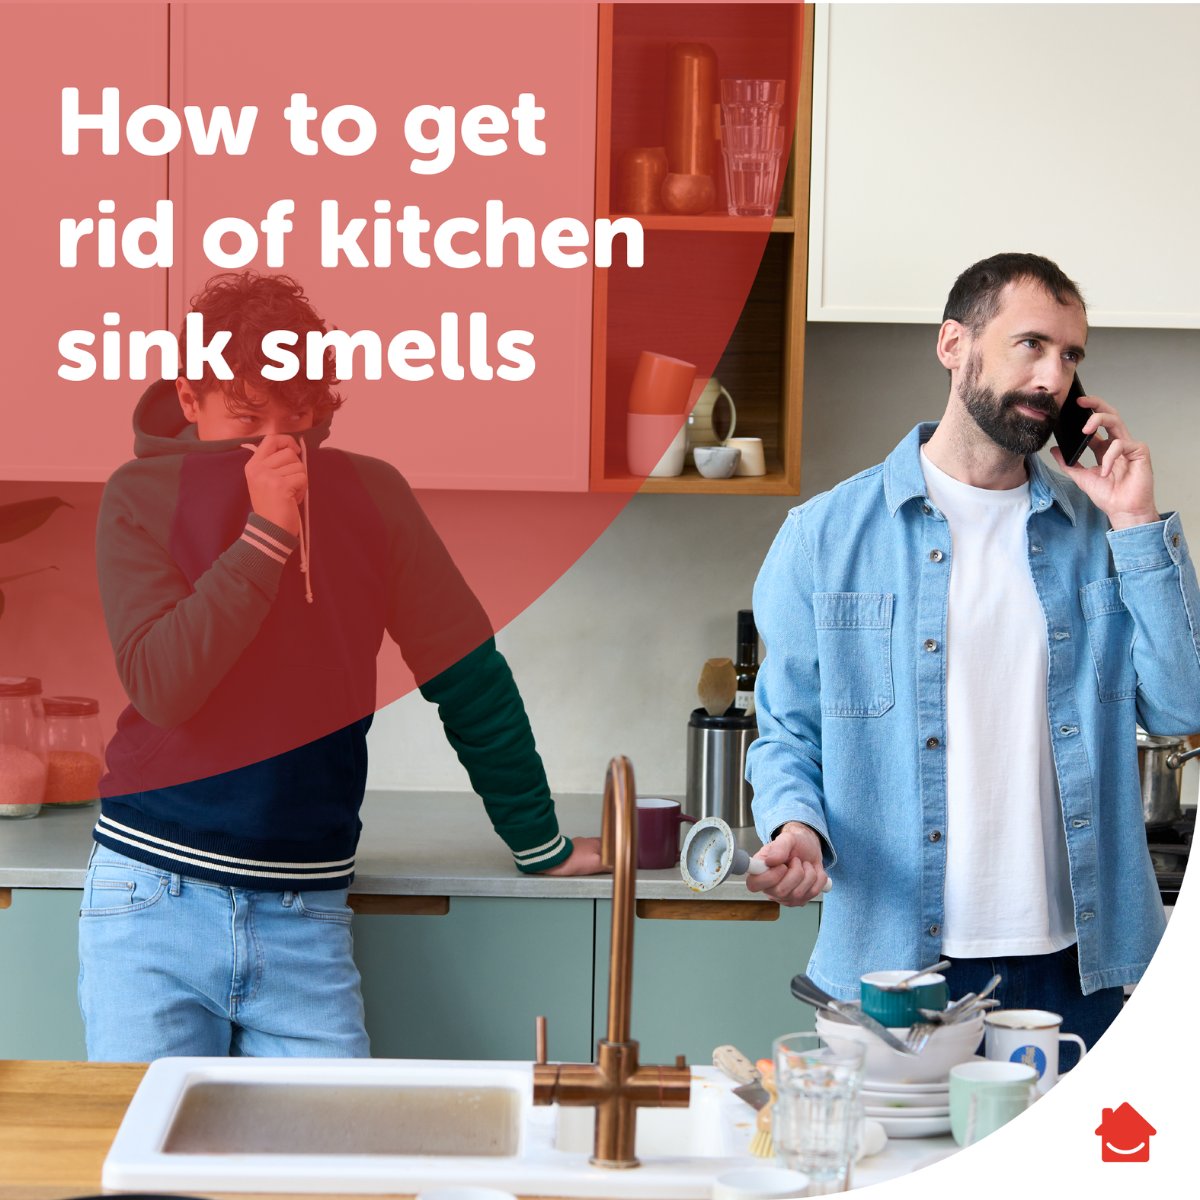 Kitchen sink kicking up a stink? Here's some hints and tips to save your noses 👃. ➡️ brnw.ch/21wJSFZ